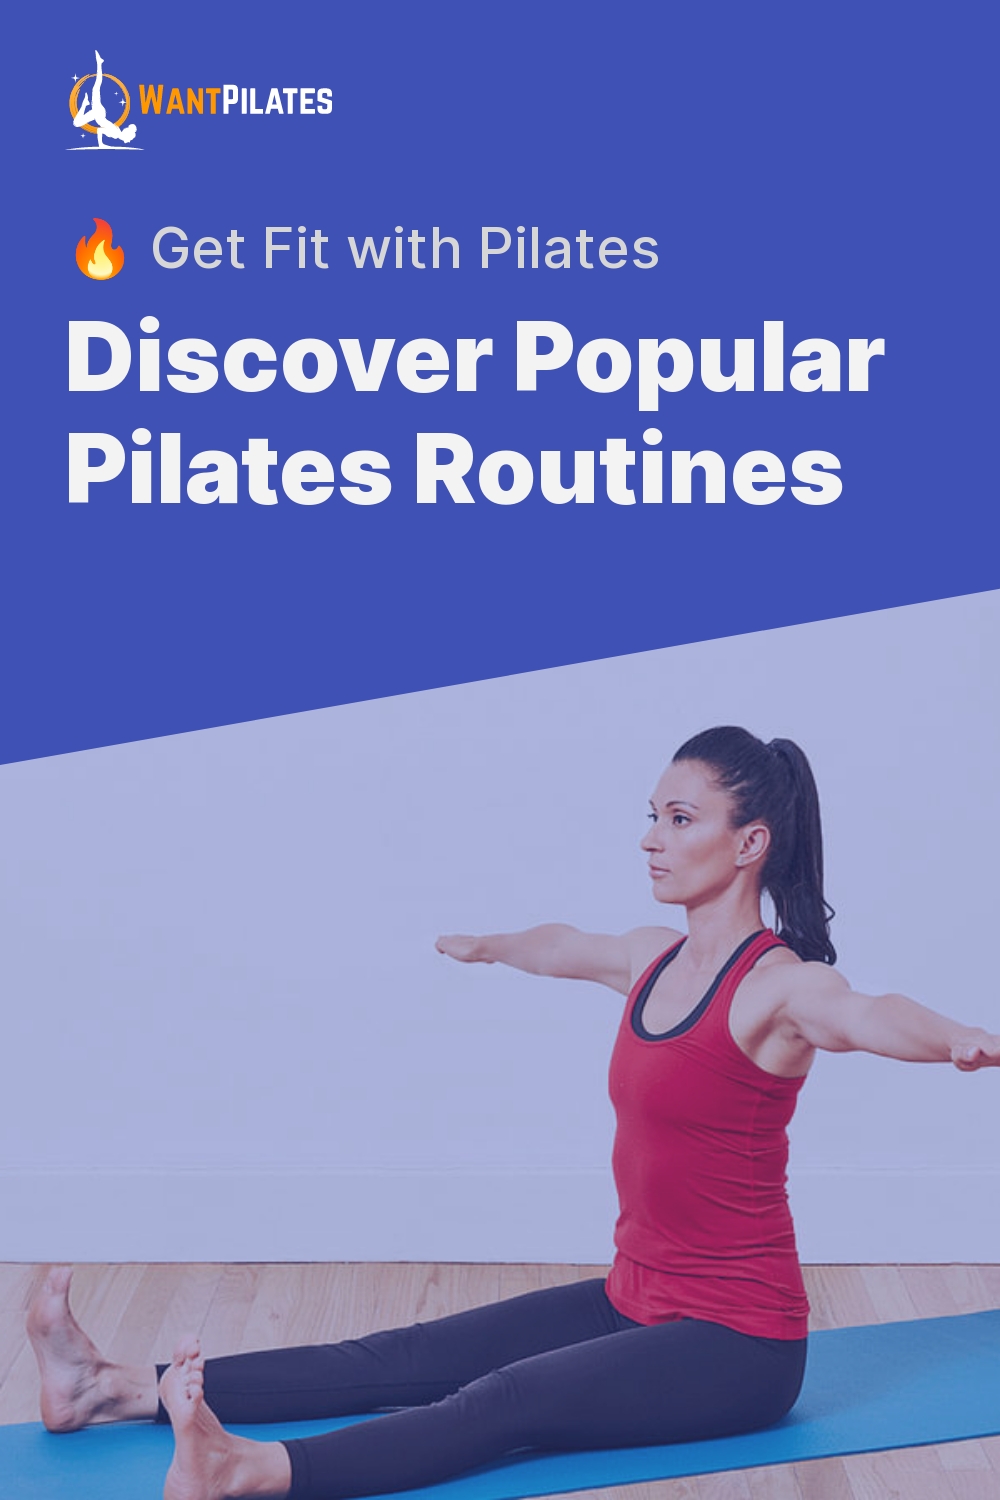 Discover Popular Pilates Routines - 🔥 Get Fit with Pilates